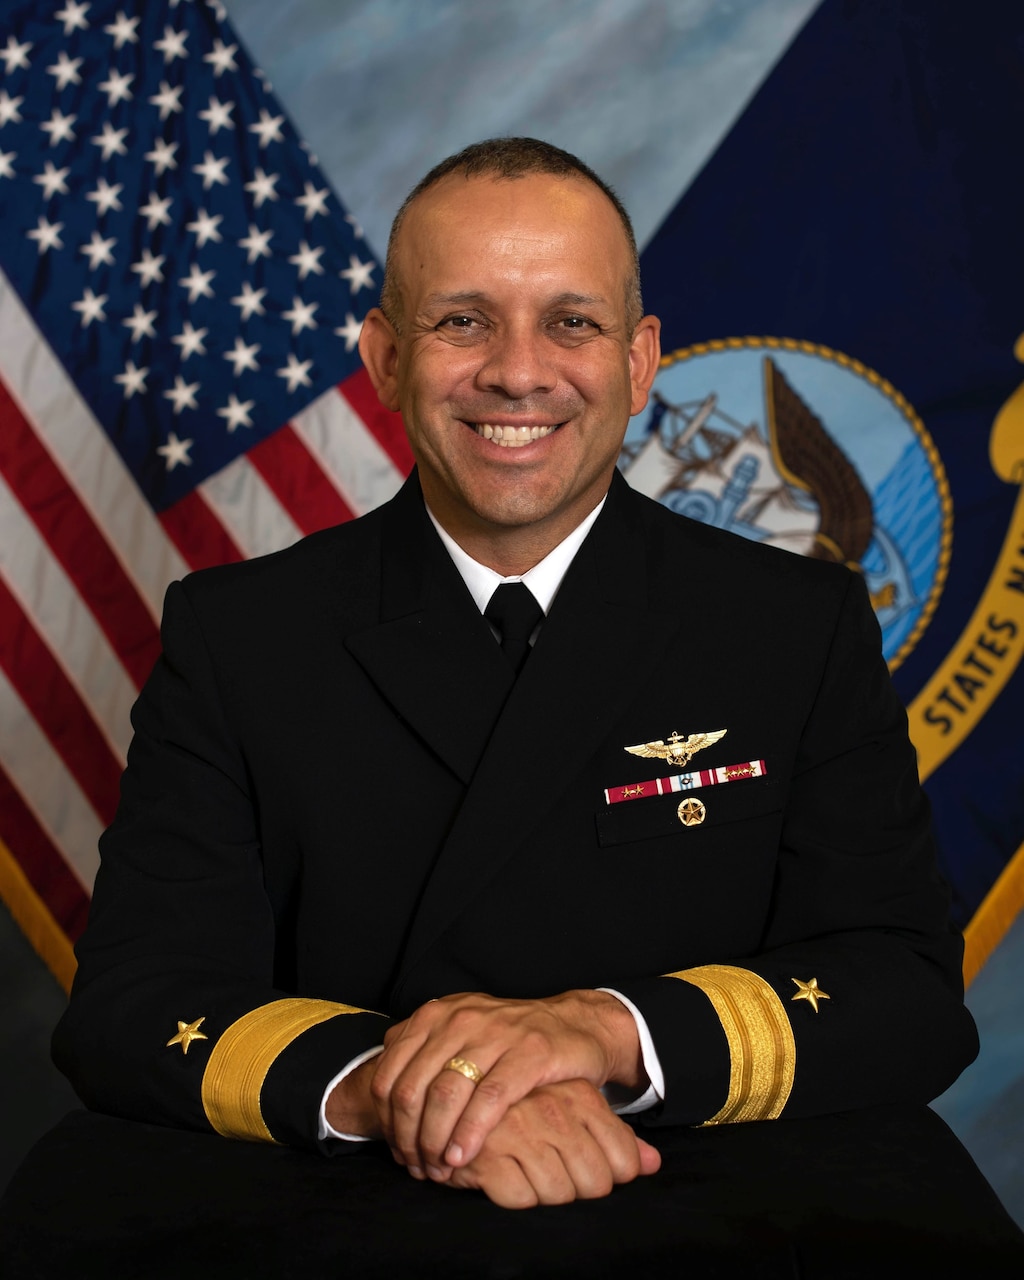 Official studio portrait of Rear Adm. John Menoni, Commander, Expeditionary Strike Group Two